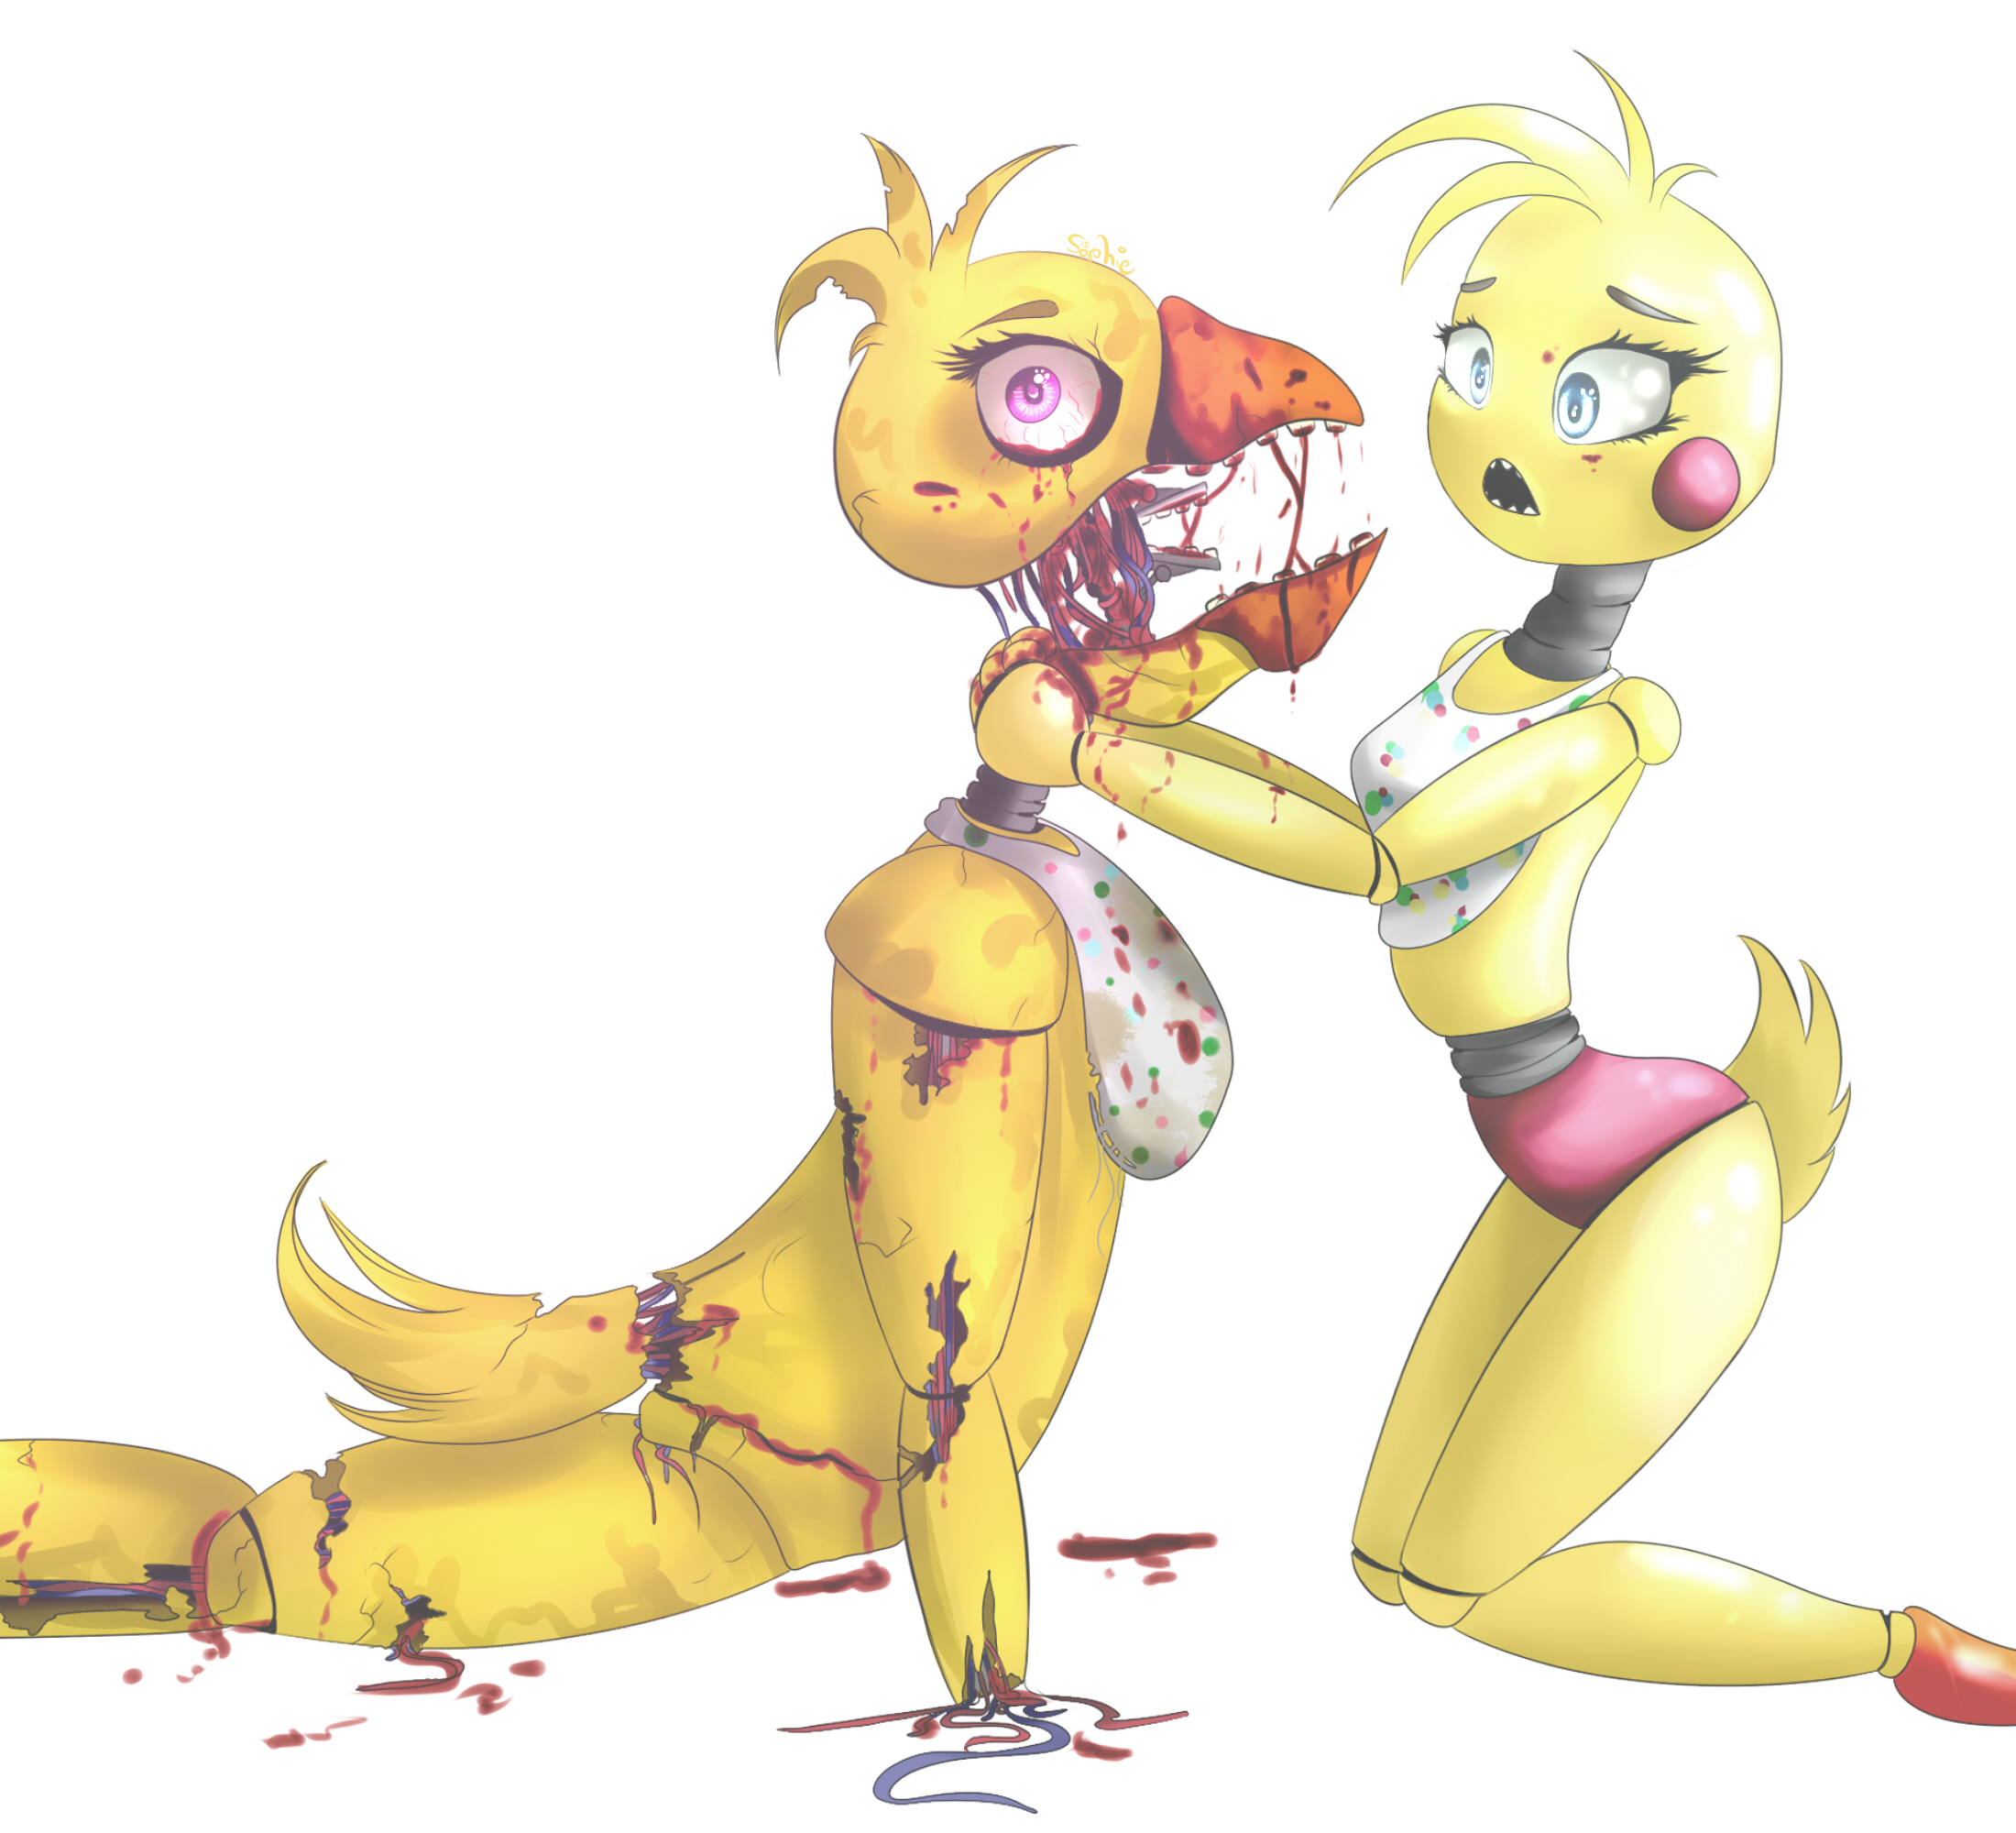 Withered Chica is fab 😏 171414521003202 by @unkowniakqmak 